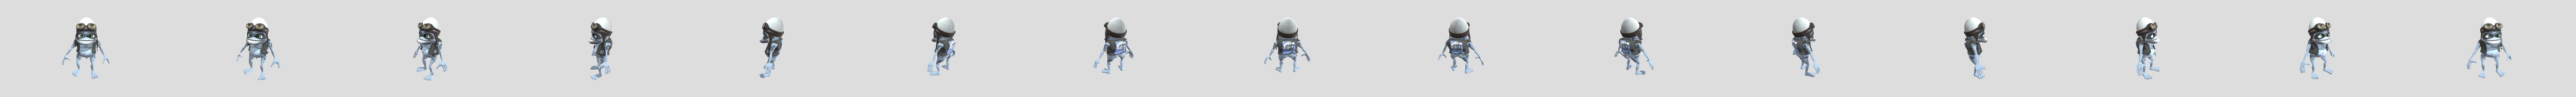 Crazy Frog - 3D model by ianwiltdotcom on Thangs